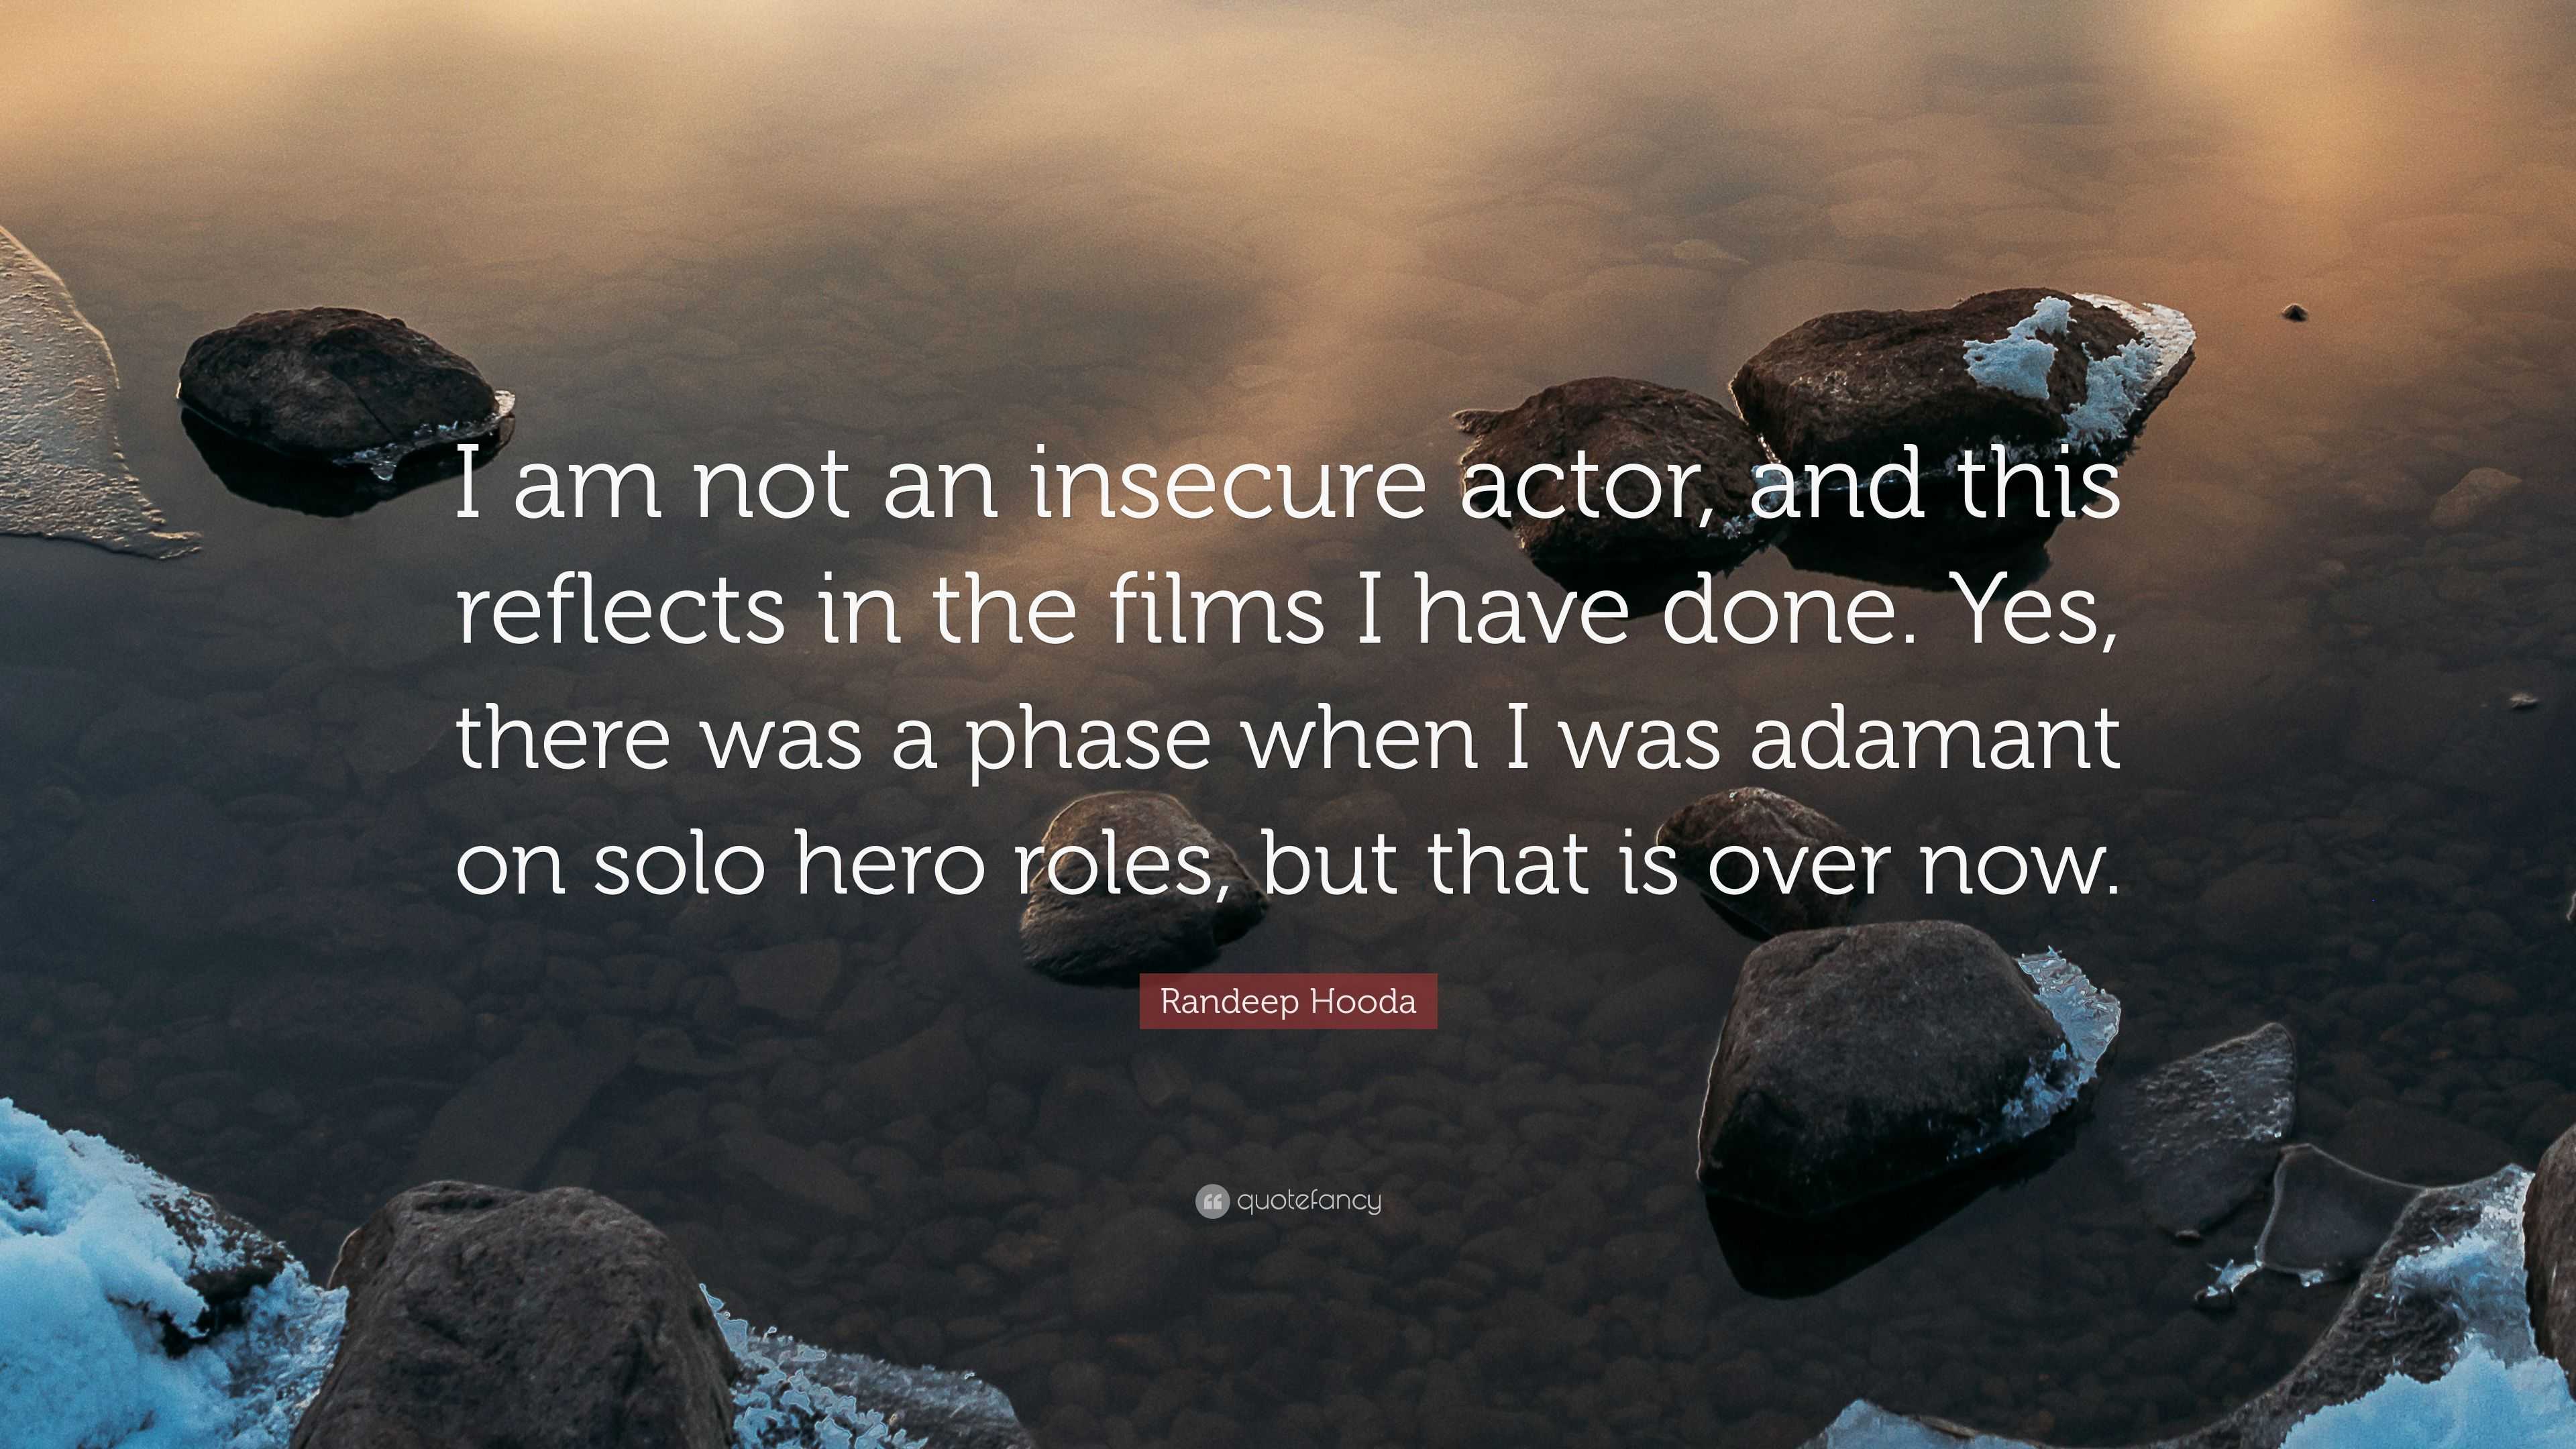 Randeep Hooda Quote: “I Am Not An Insecure Actor, And This Reflects In The Films I Have Done. Yes, There Was A Phase When I Was Adamant On Sol...”